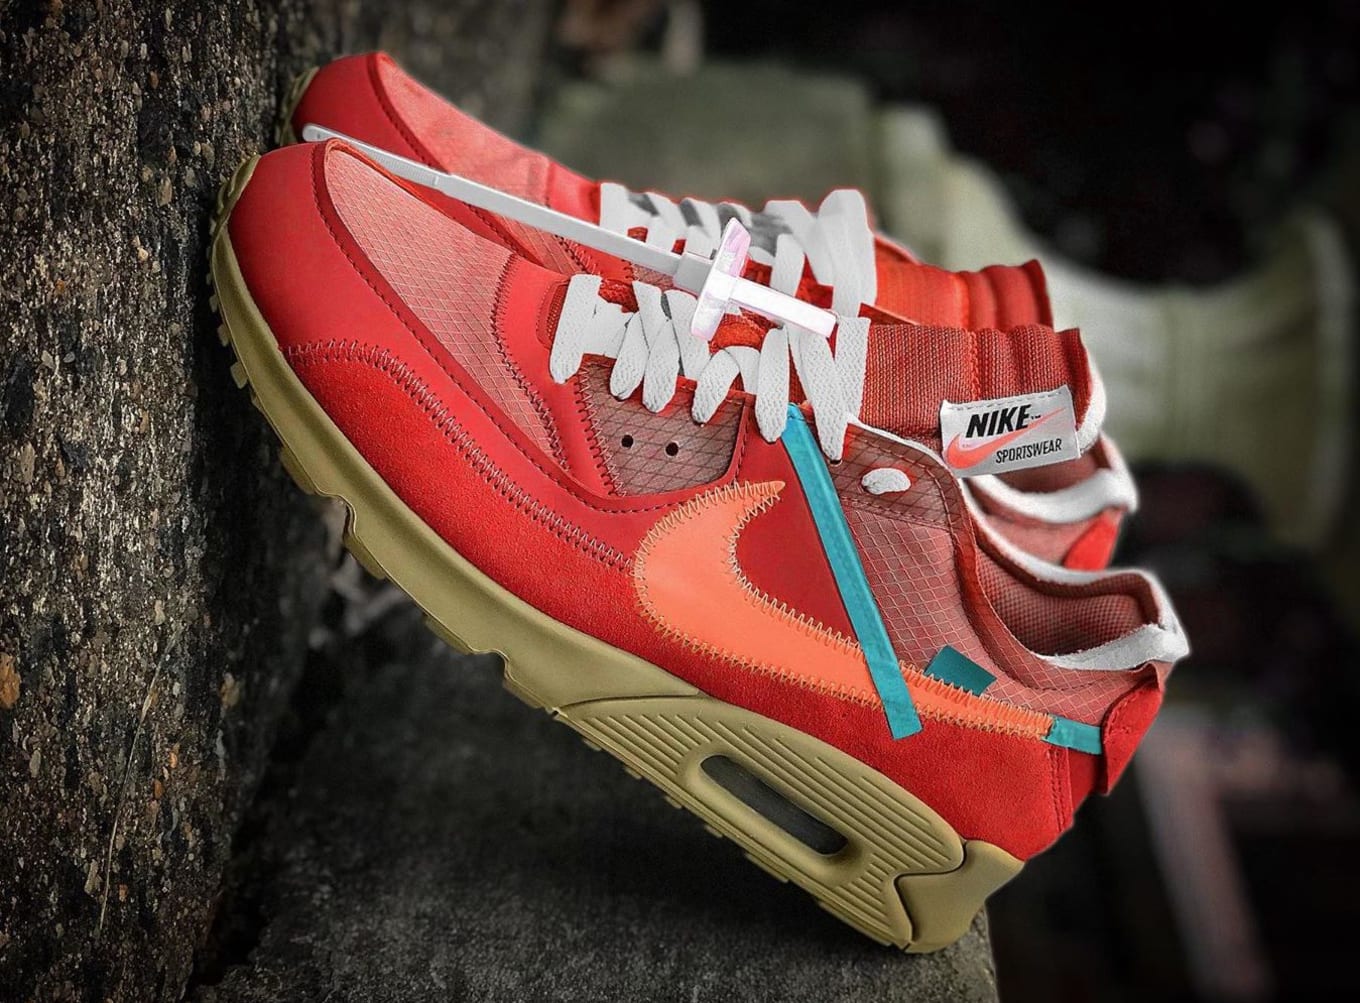 Shrug shoulders Give birth wireless Off-White x Nike Air Max 90 'University Red' Release Date AA7293-600 | Sole  Collector